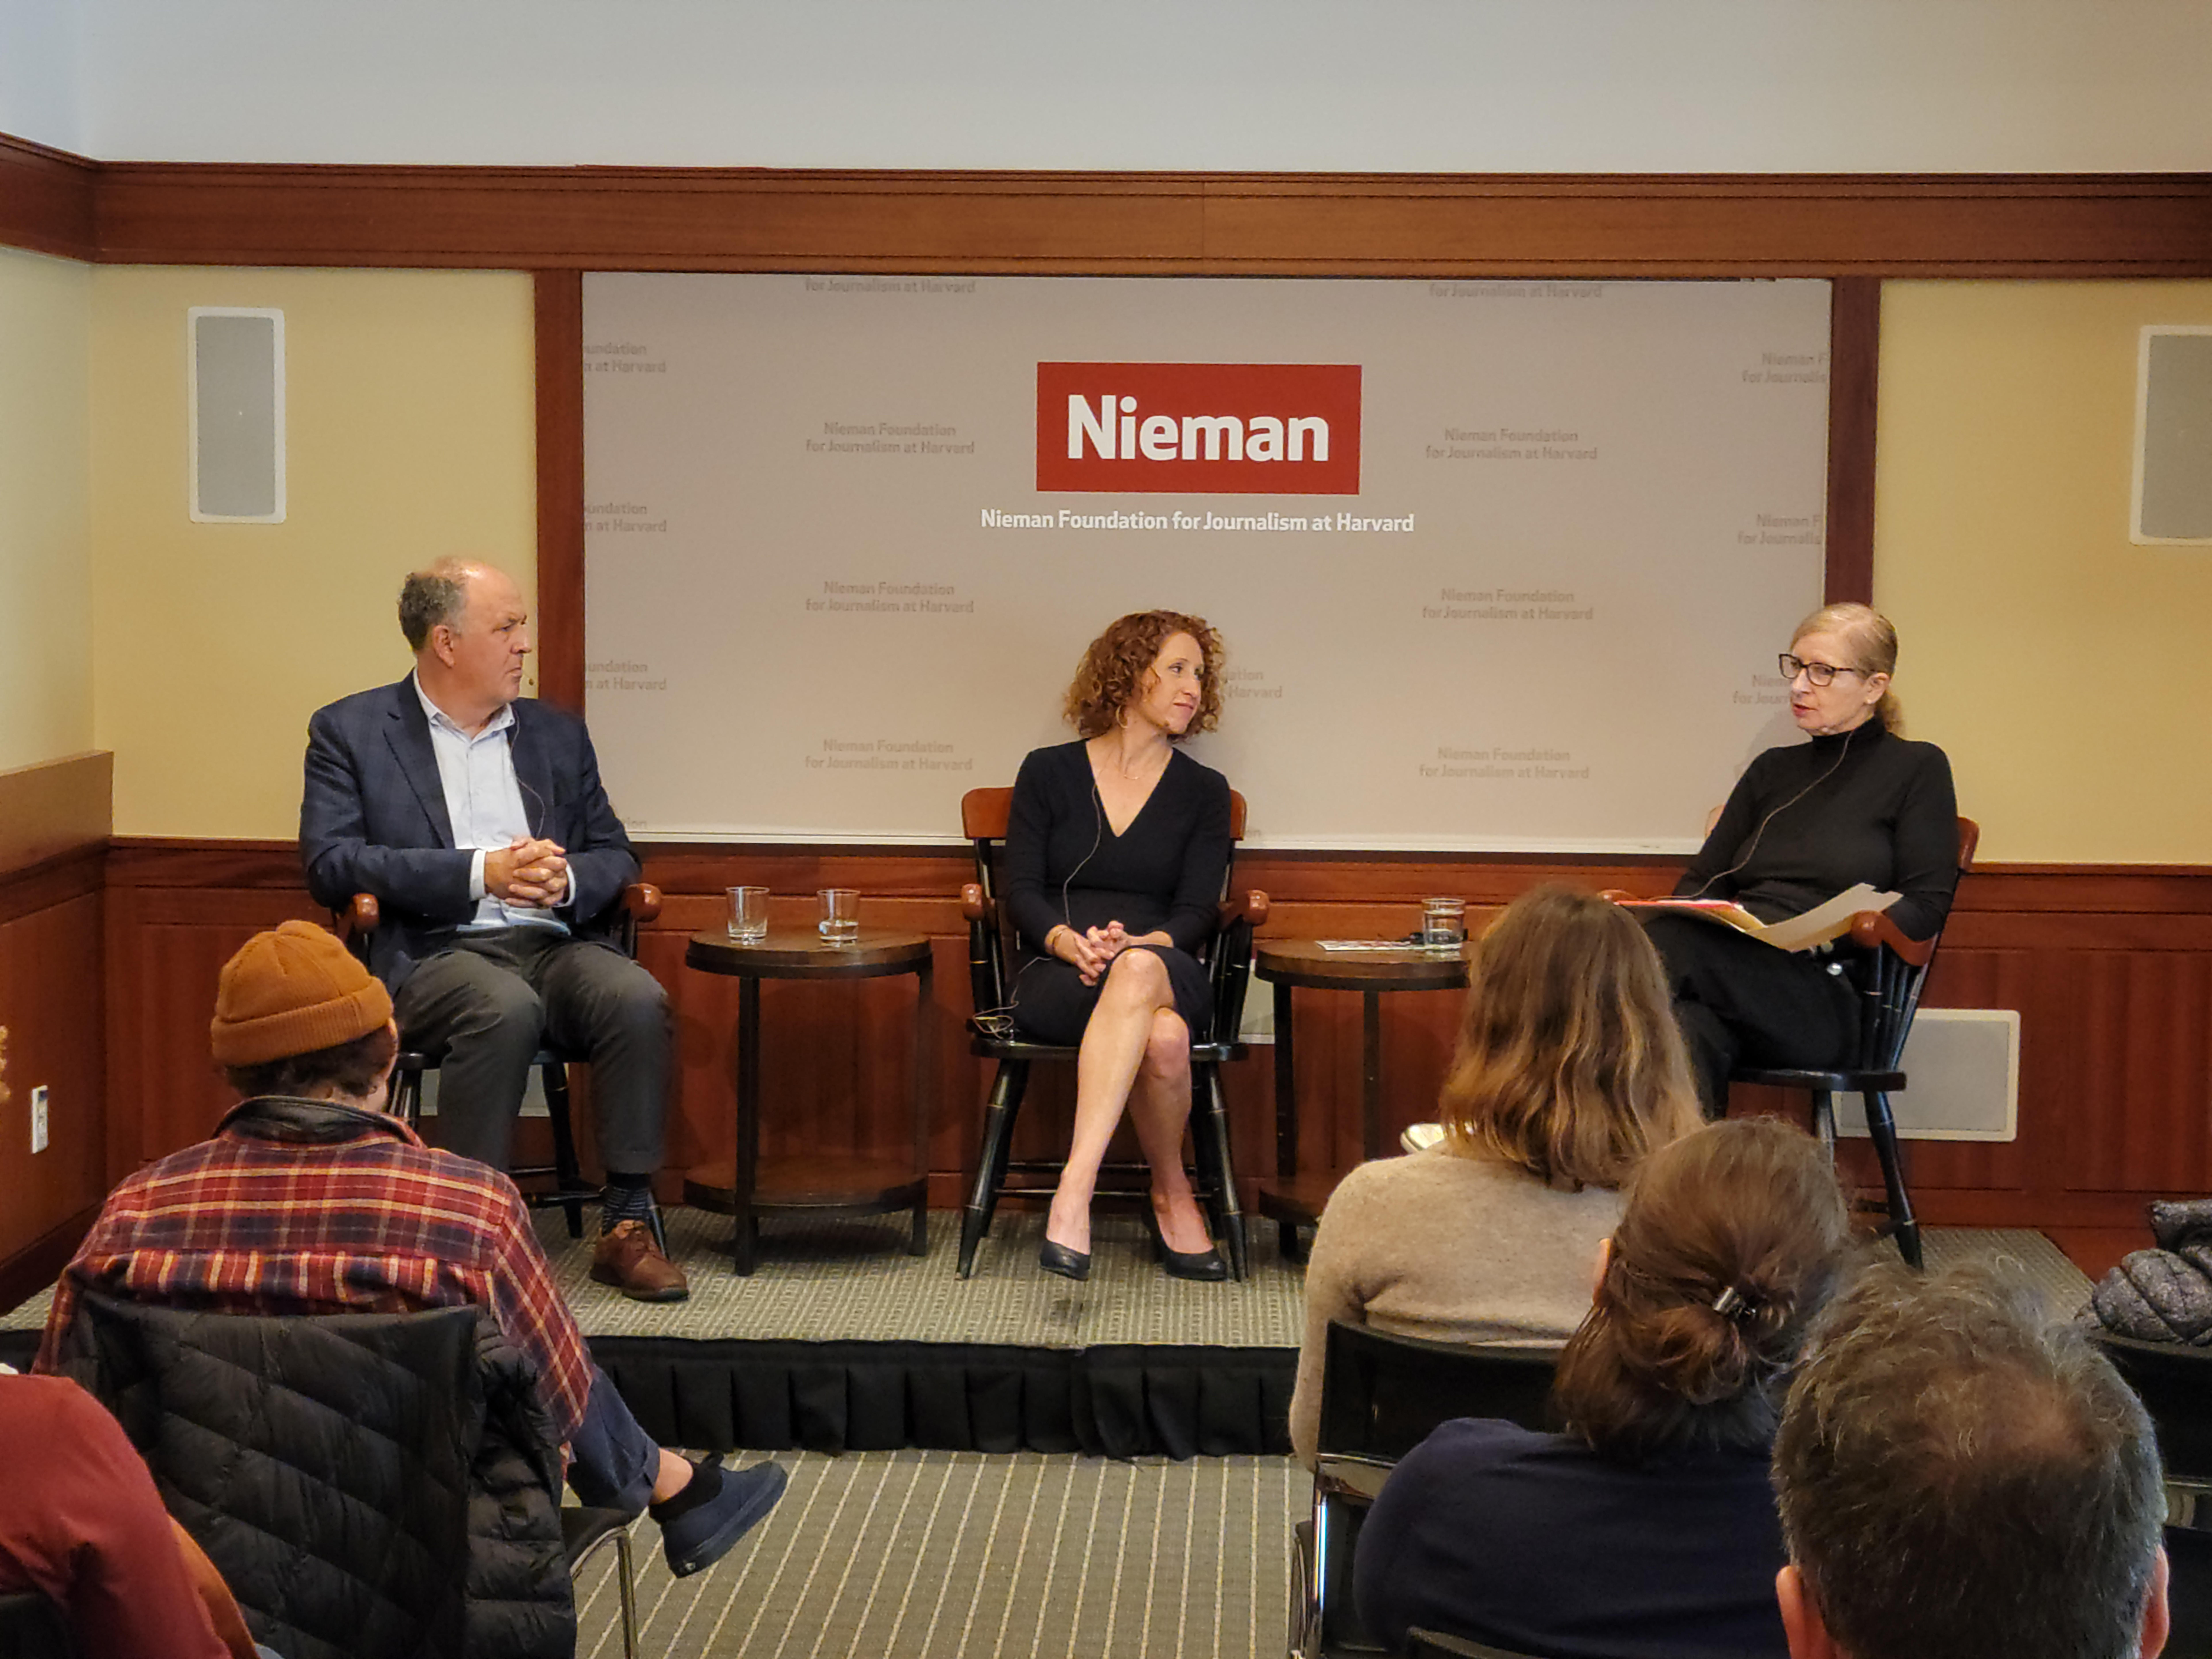 On a stage, against a banner that says "Nieman" on it, the panelists sit (L-R: Michael Abramowitz, Matea Gold, Ann Marie Lipinski). A crowd in the audience is seen watching them.